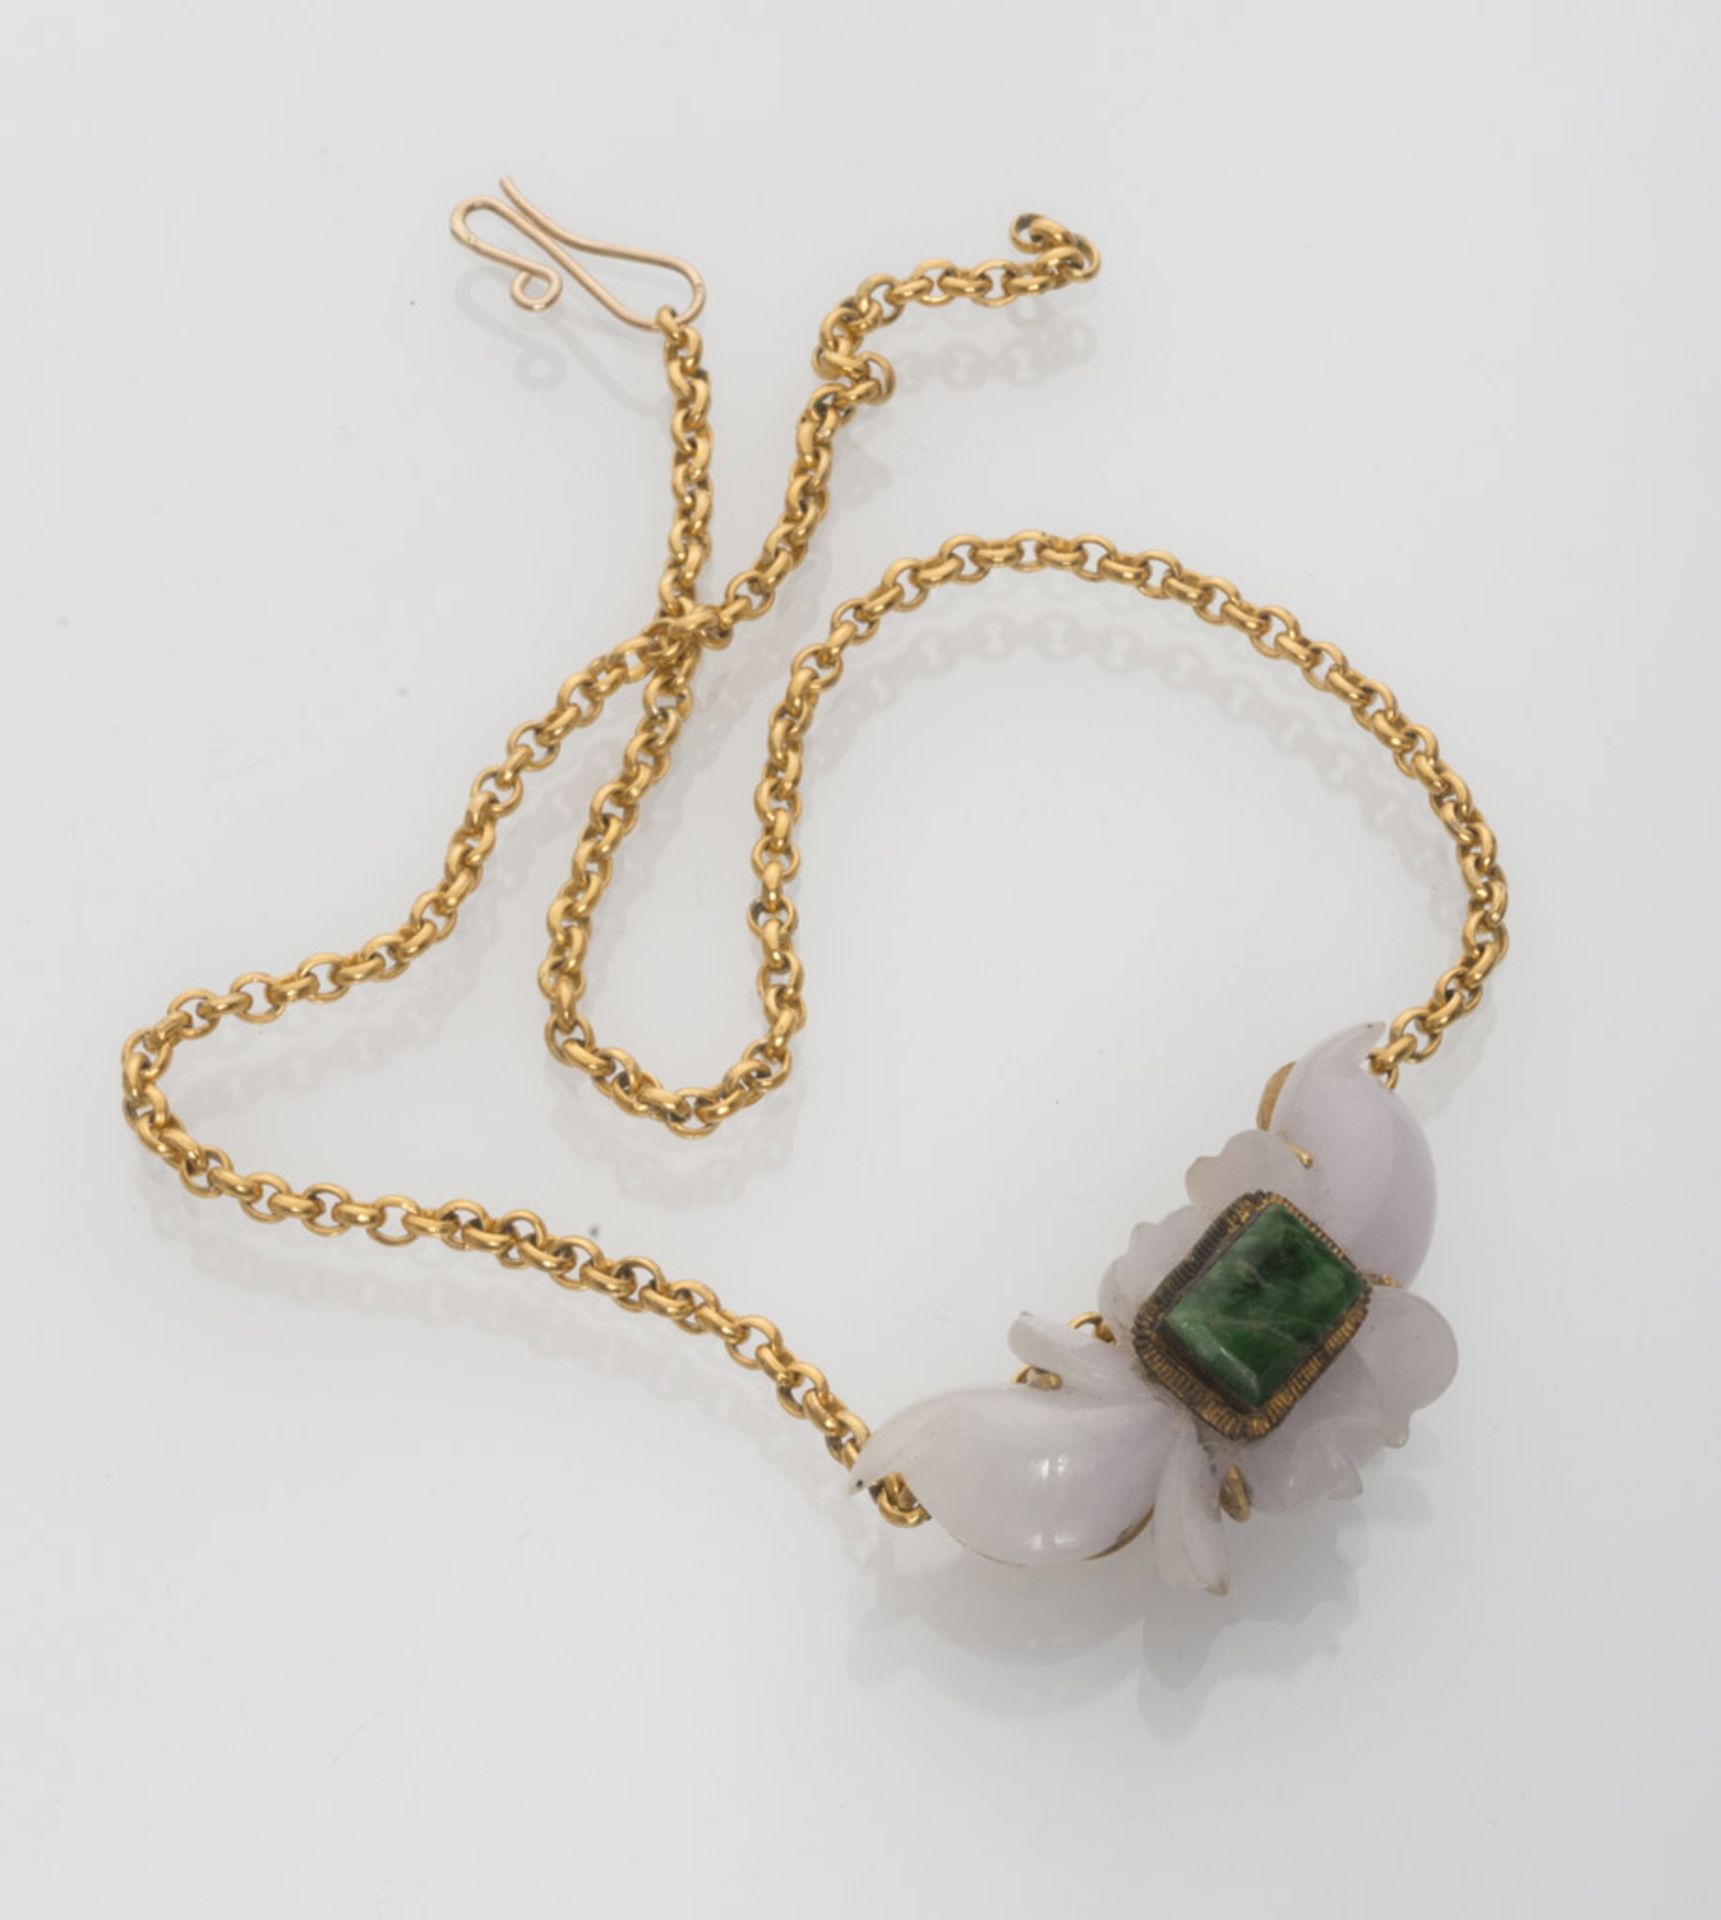 COLLIER chain in gilded metal with pendant in jade and central green stone. Length cm. 42,5. COLLIER